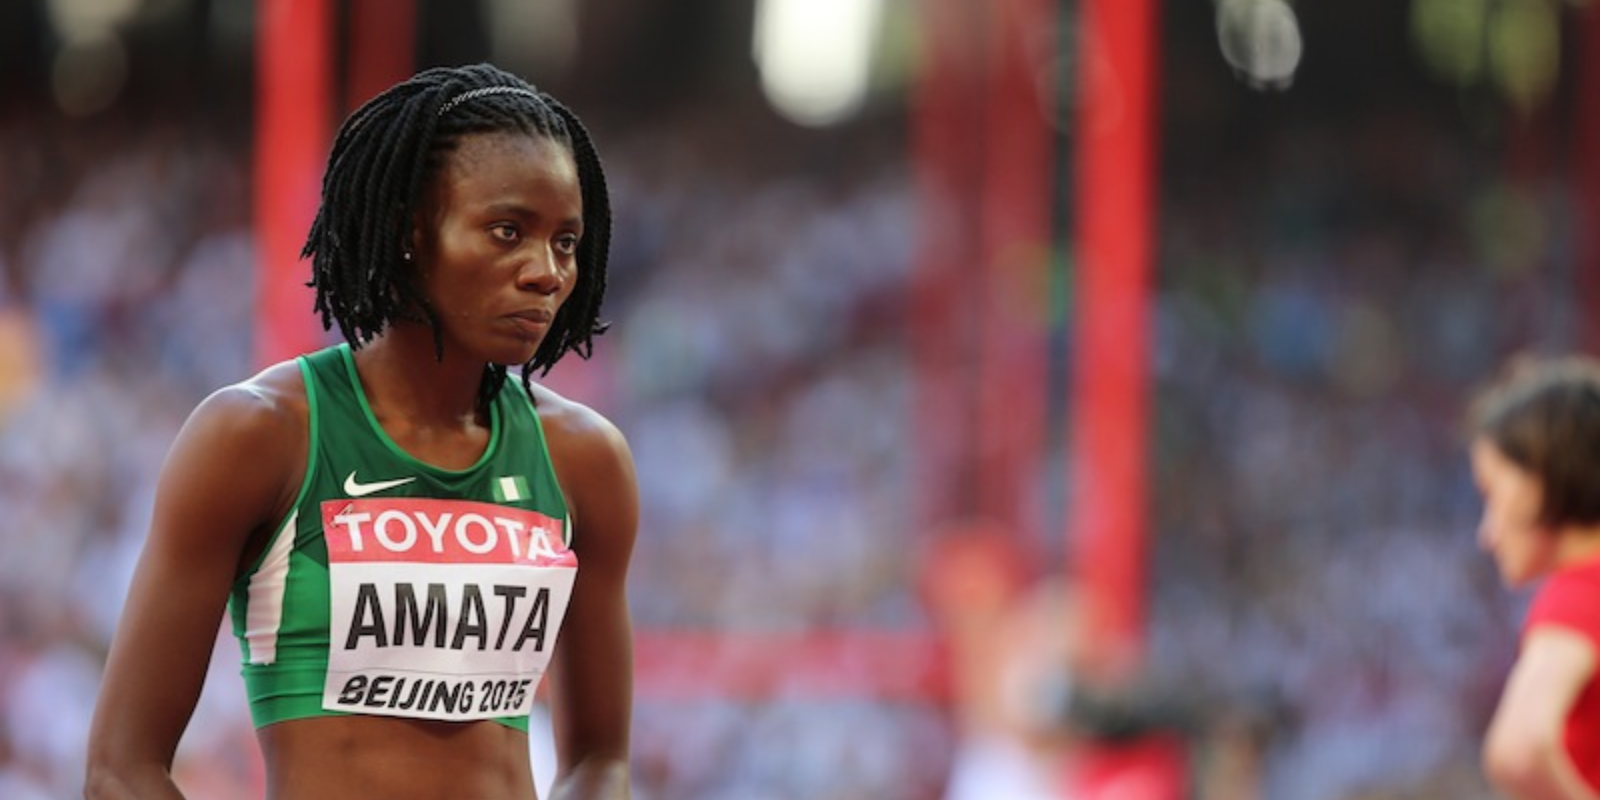 What sport does Doreen Amata participate in?